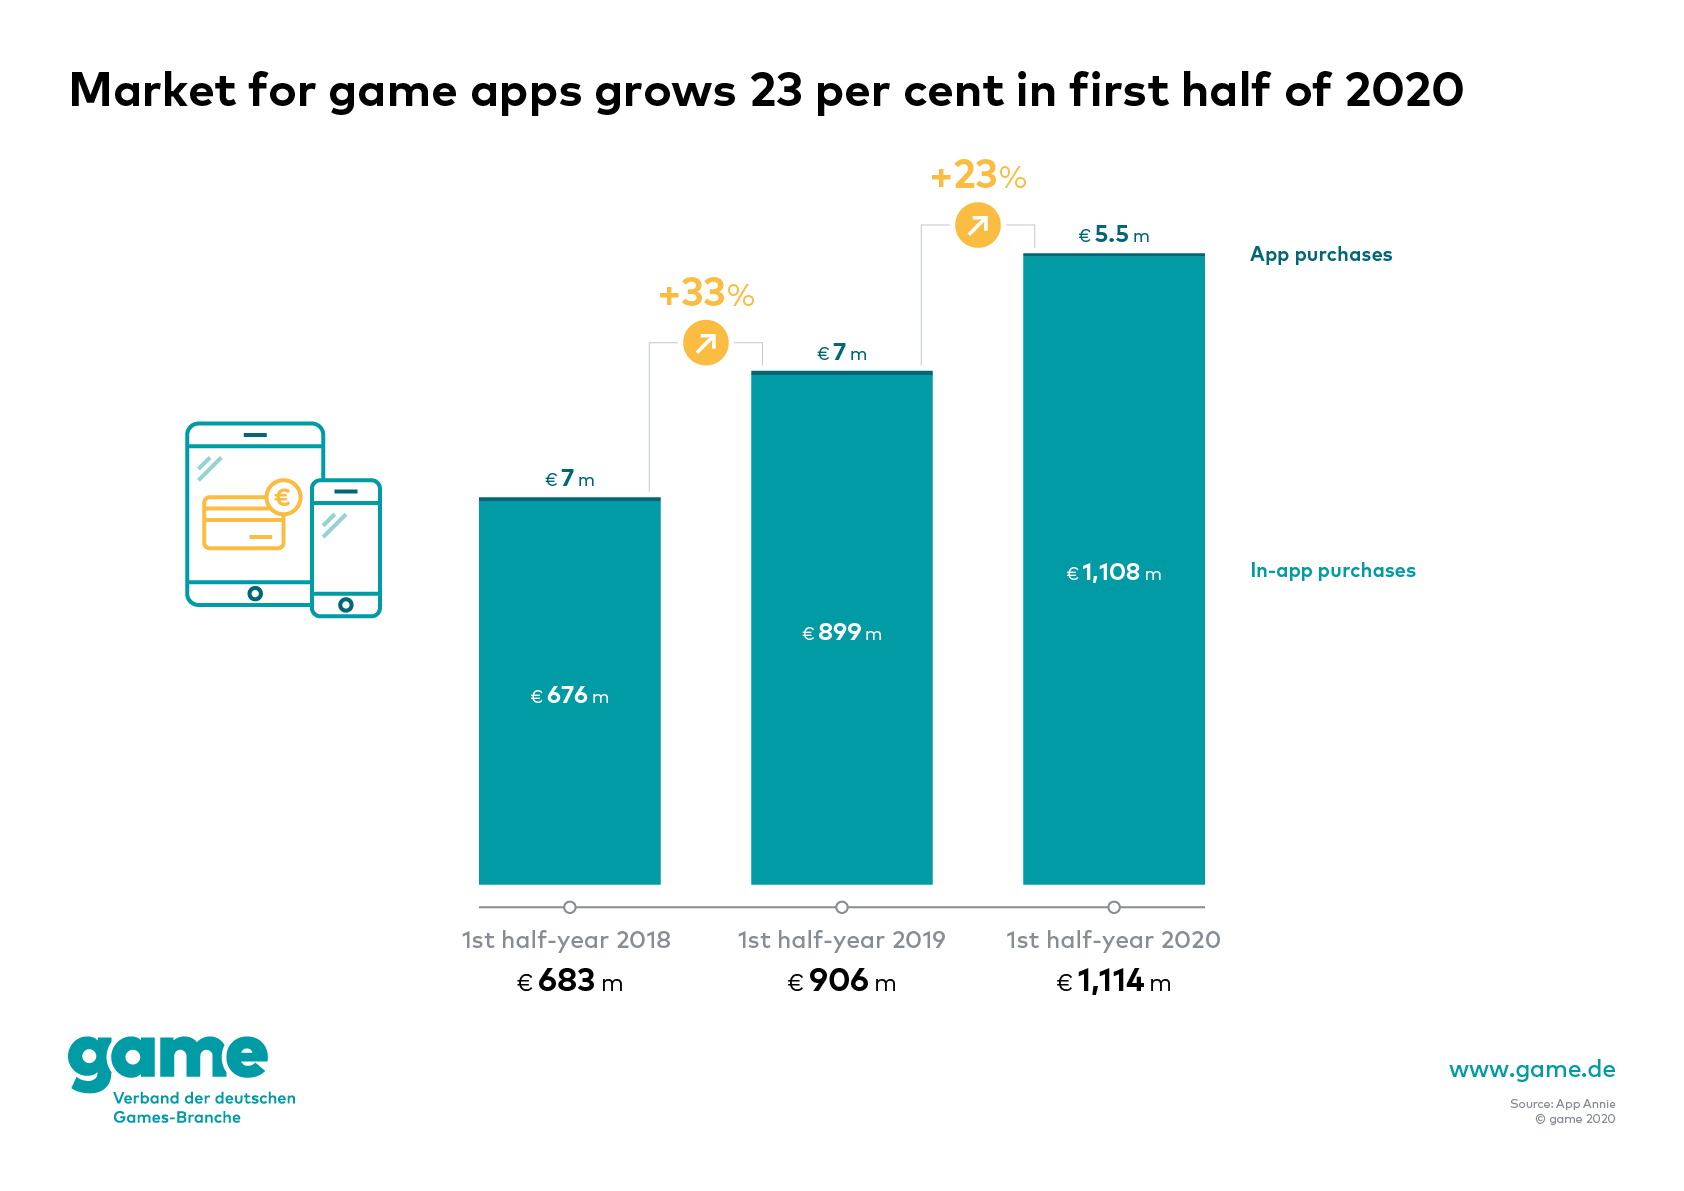 Market for game apps in first half of 2020